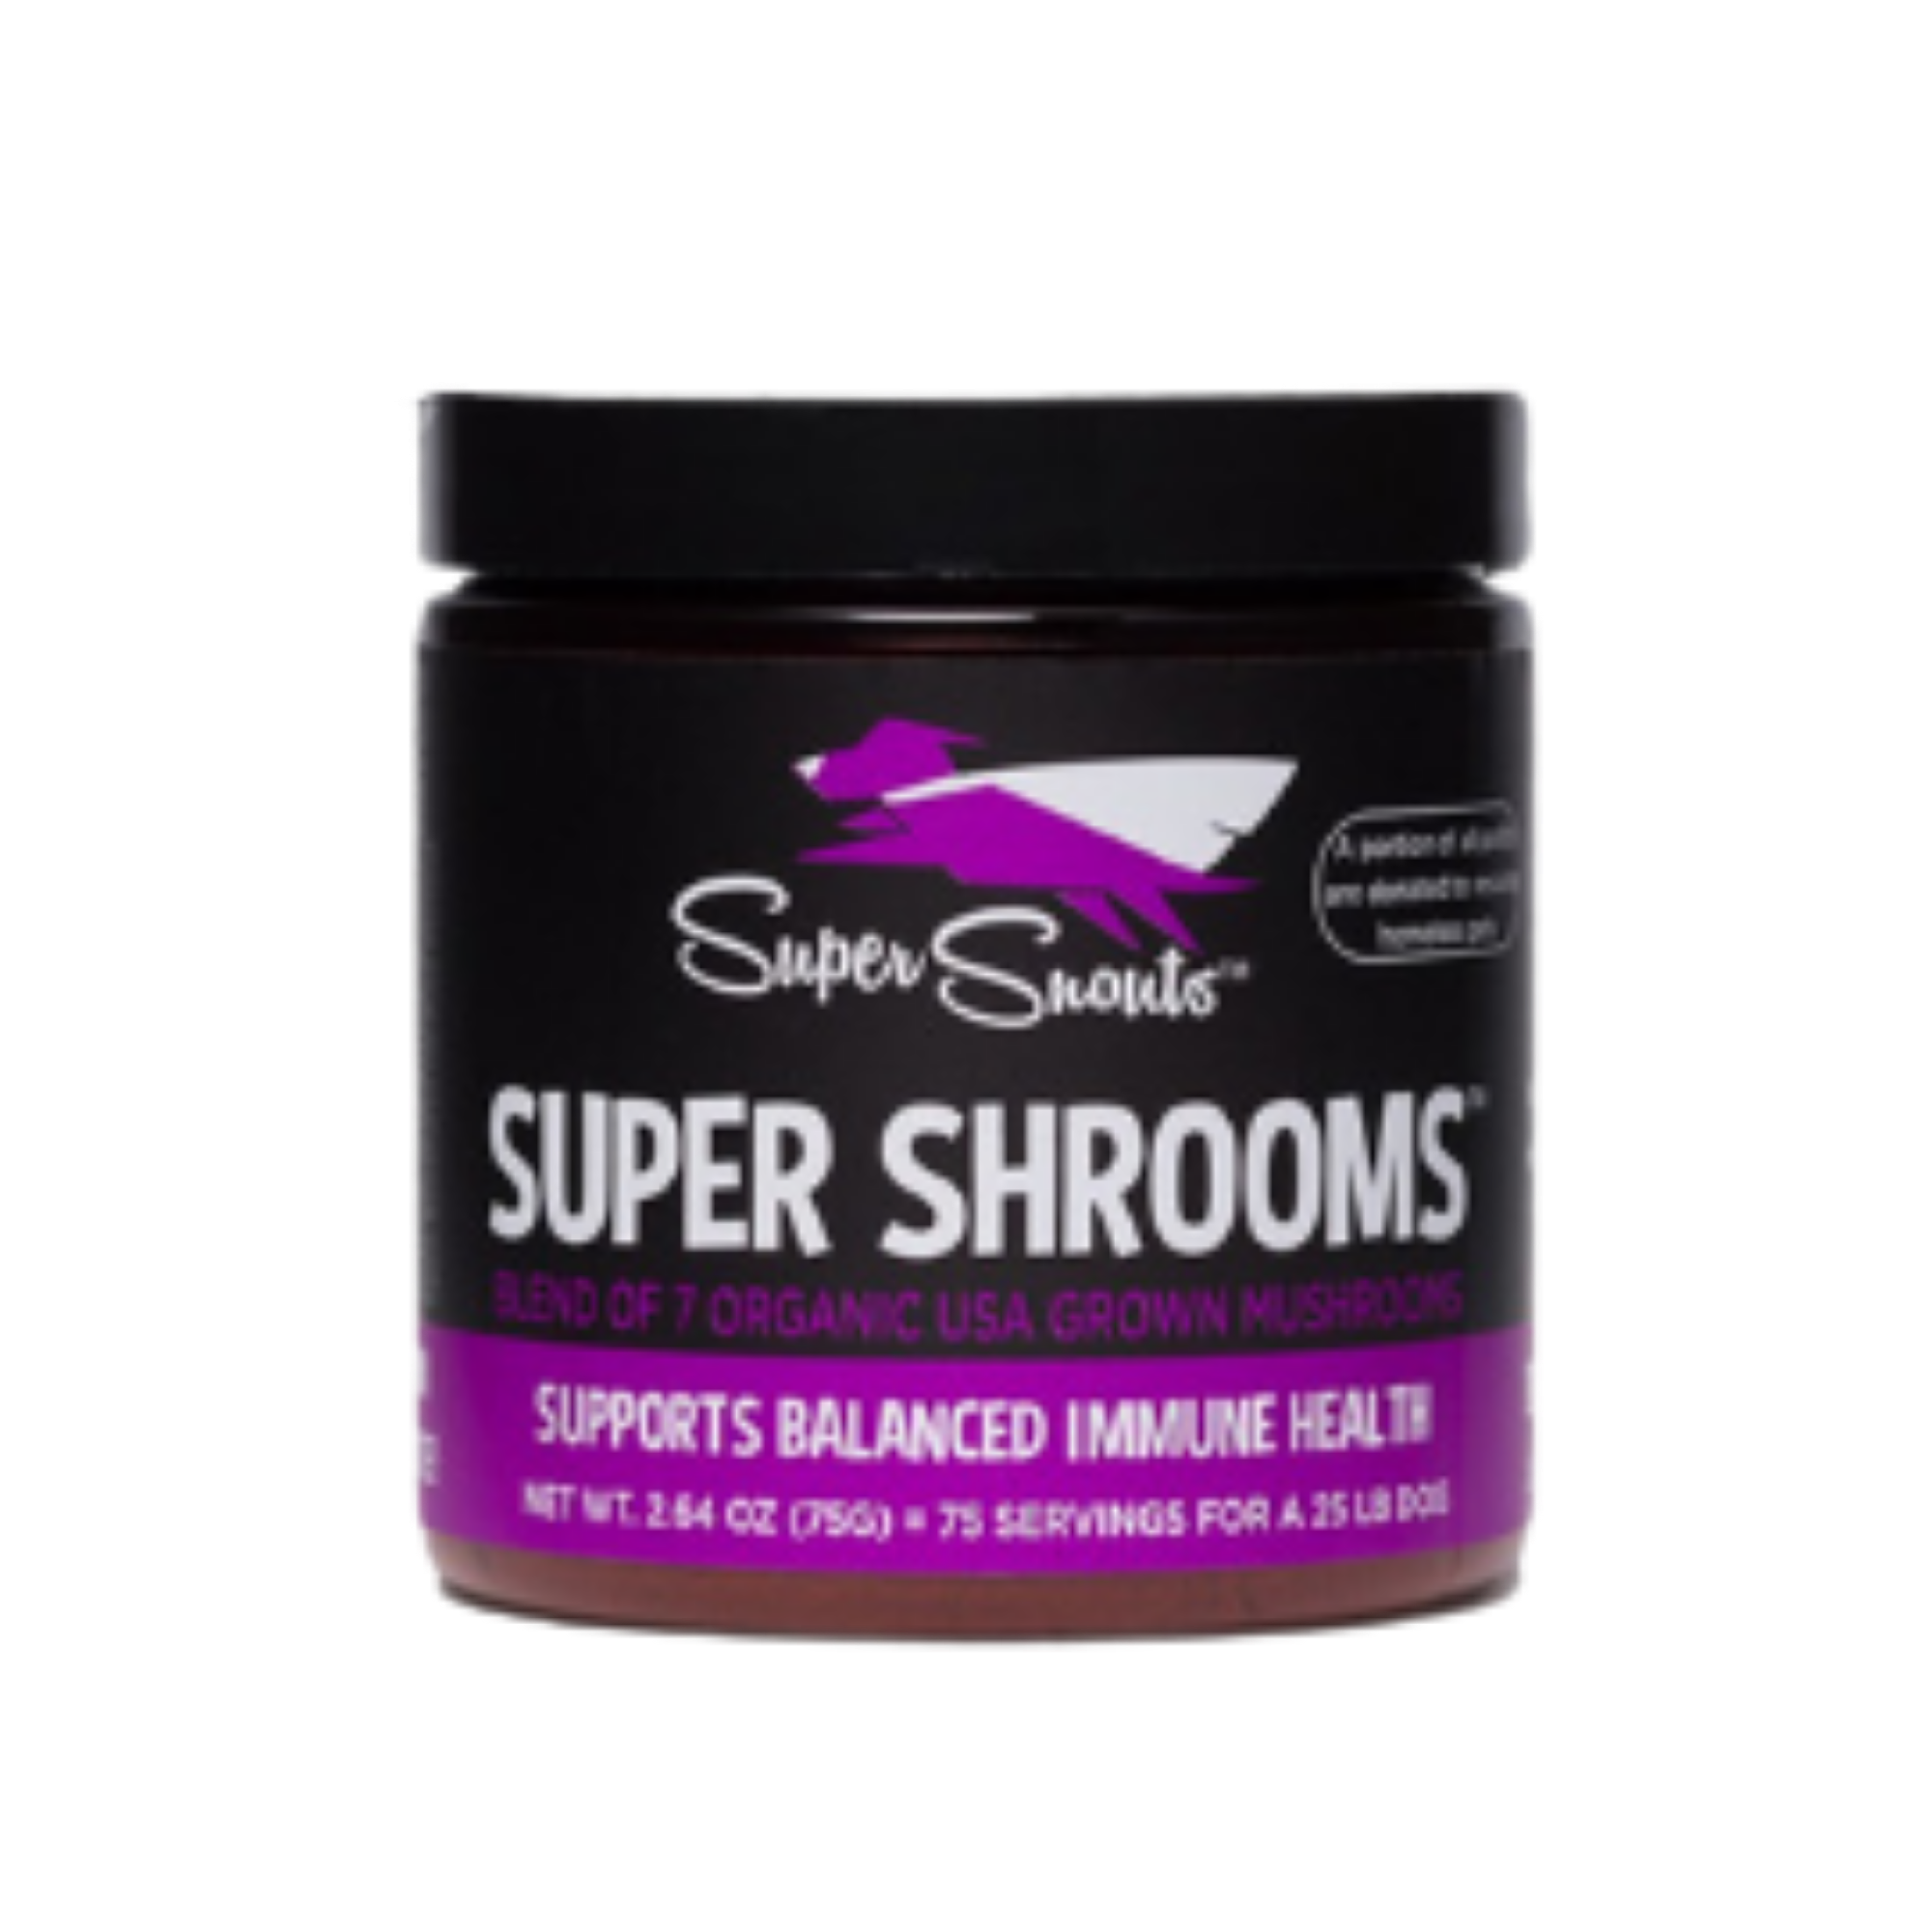 Super Snouts Super Shrooms Supplement for Dogs & Cats 2.64 oz - Mutts & Co.